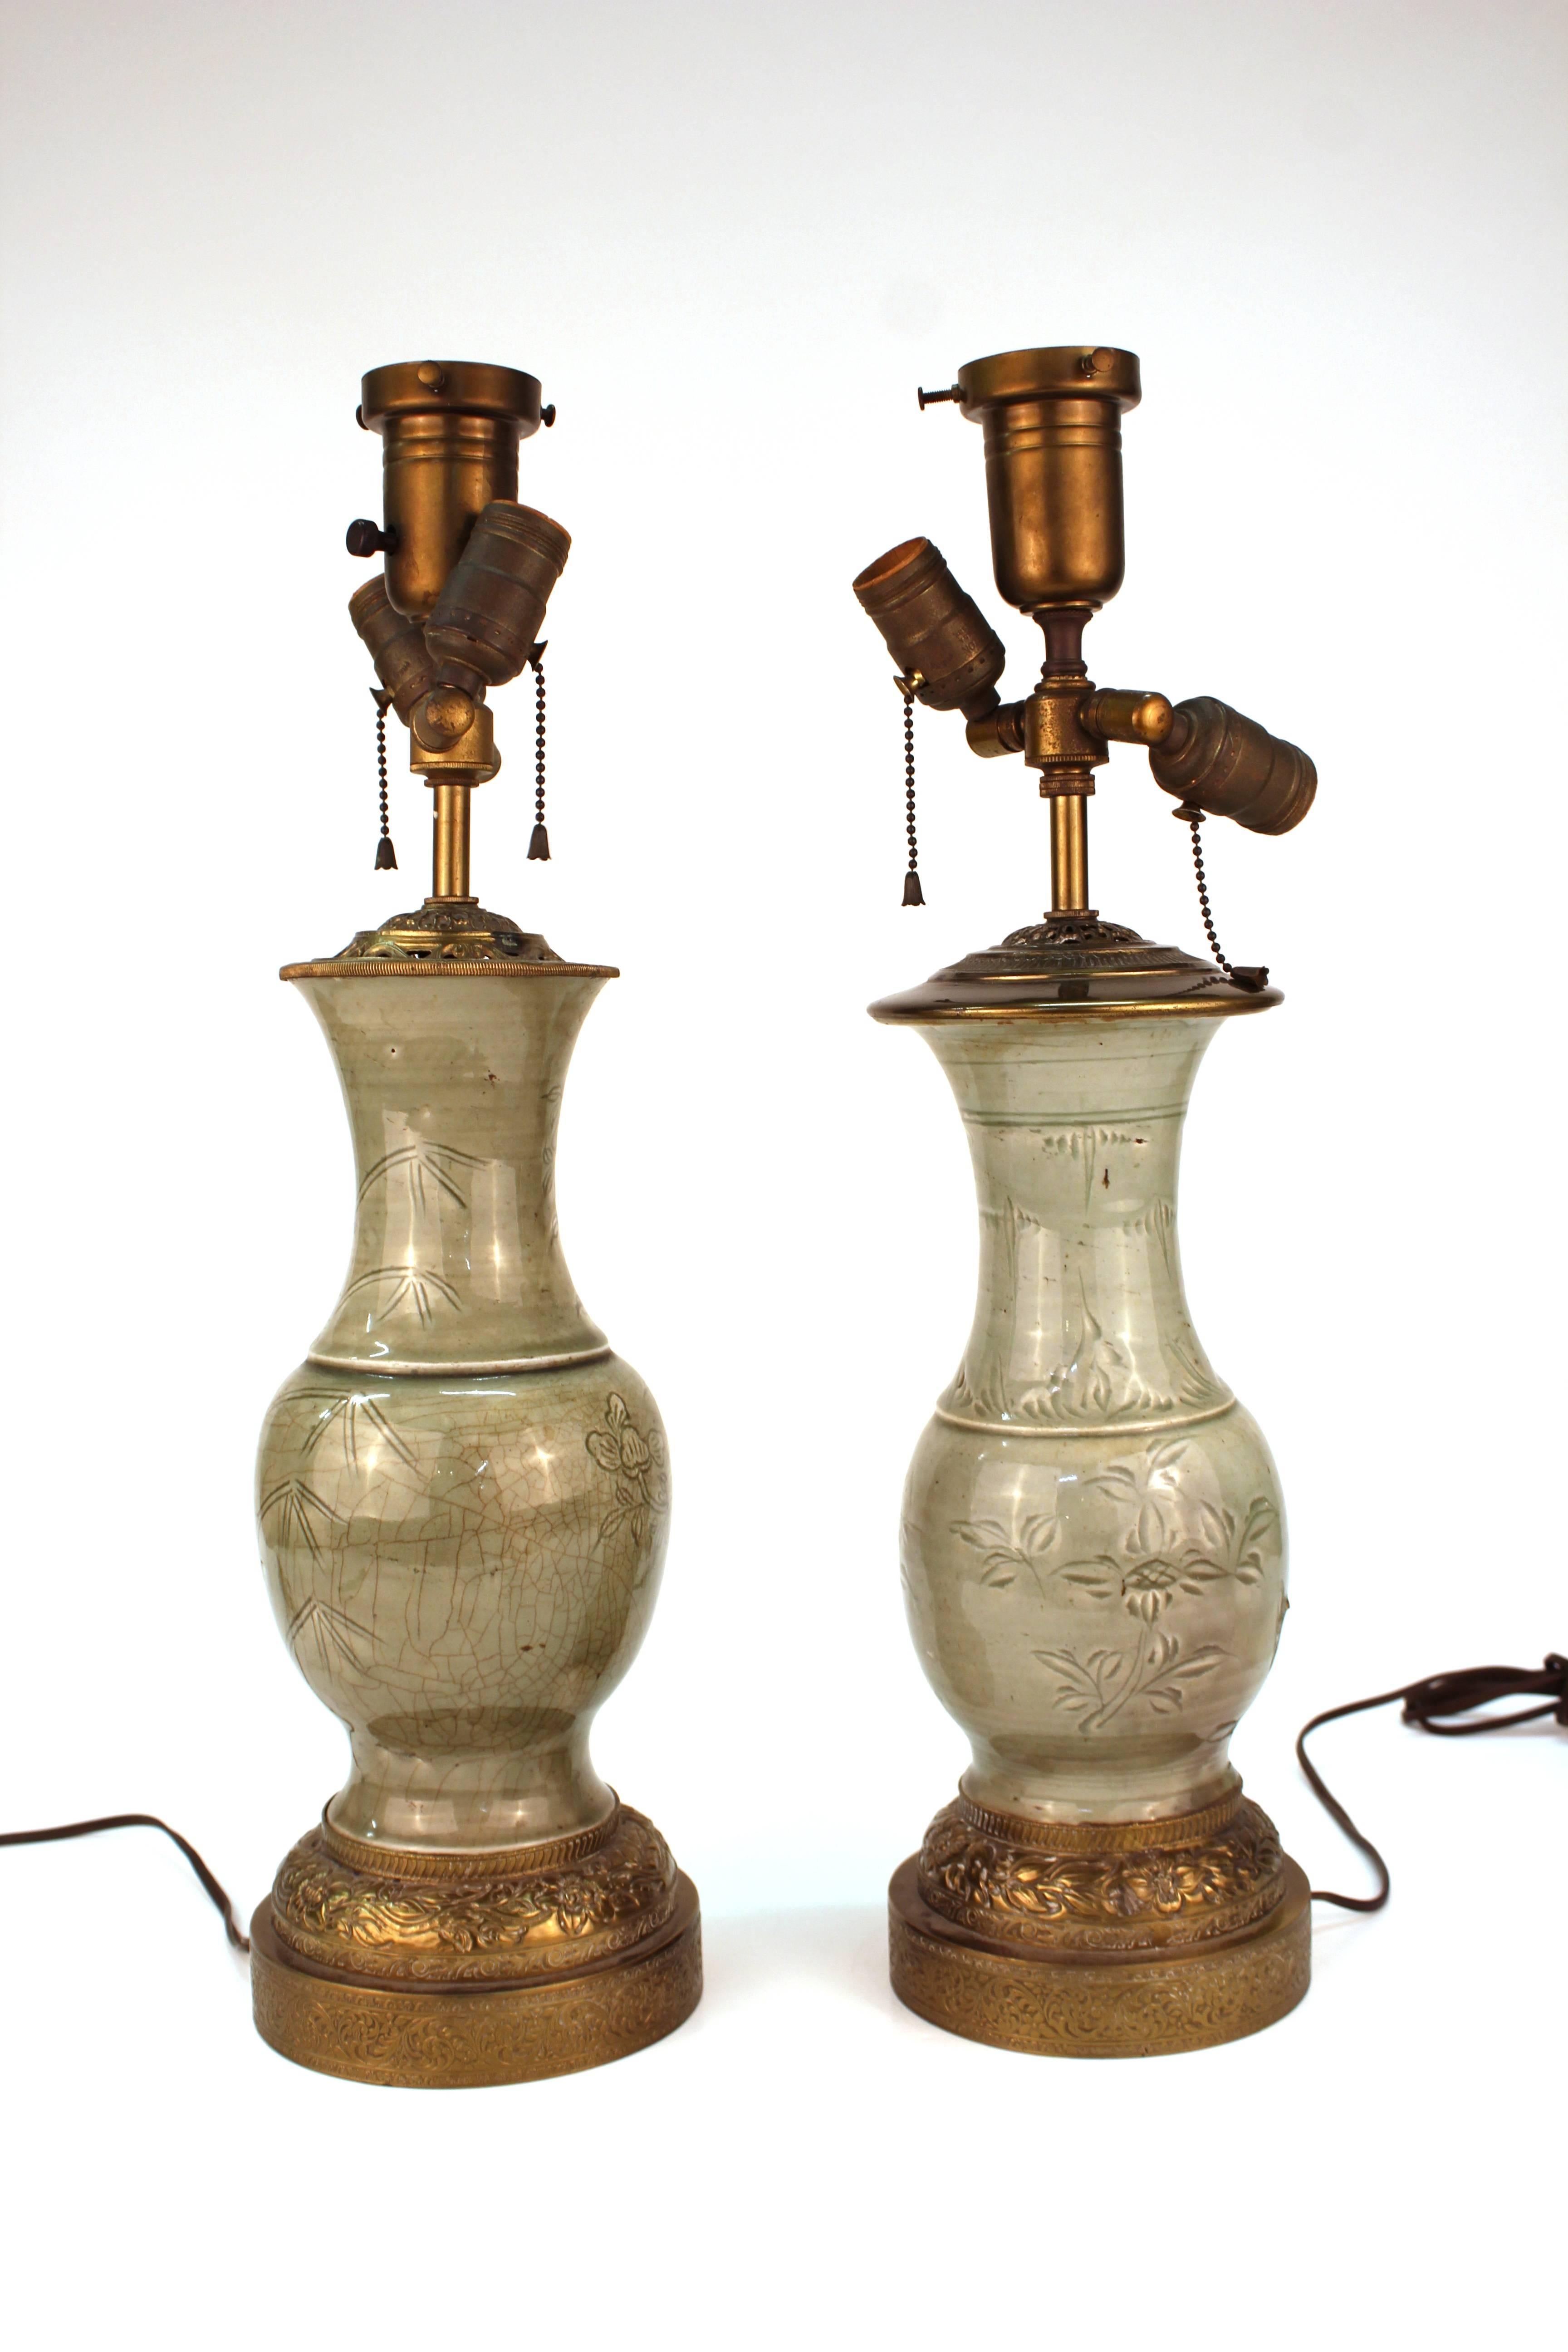 Pair of Chinese Ming dynasty Longquan table lamps in celadon glazed porcelain in the shape of yen yen vases with gilt brass fittings and a bamboo and flowering vines motif. The pair is in good antique condition.